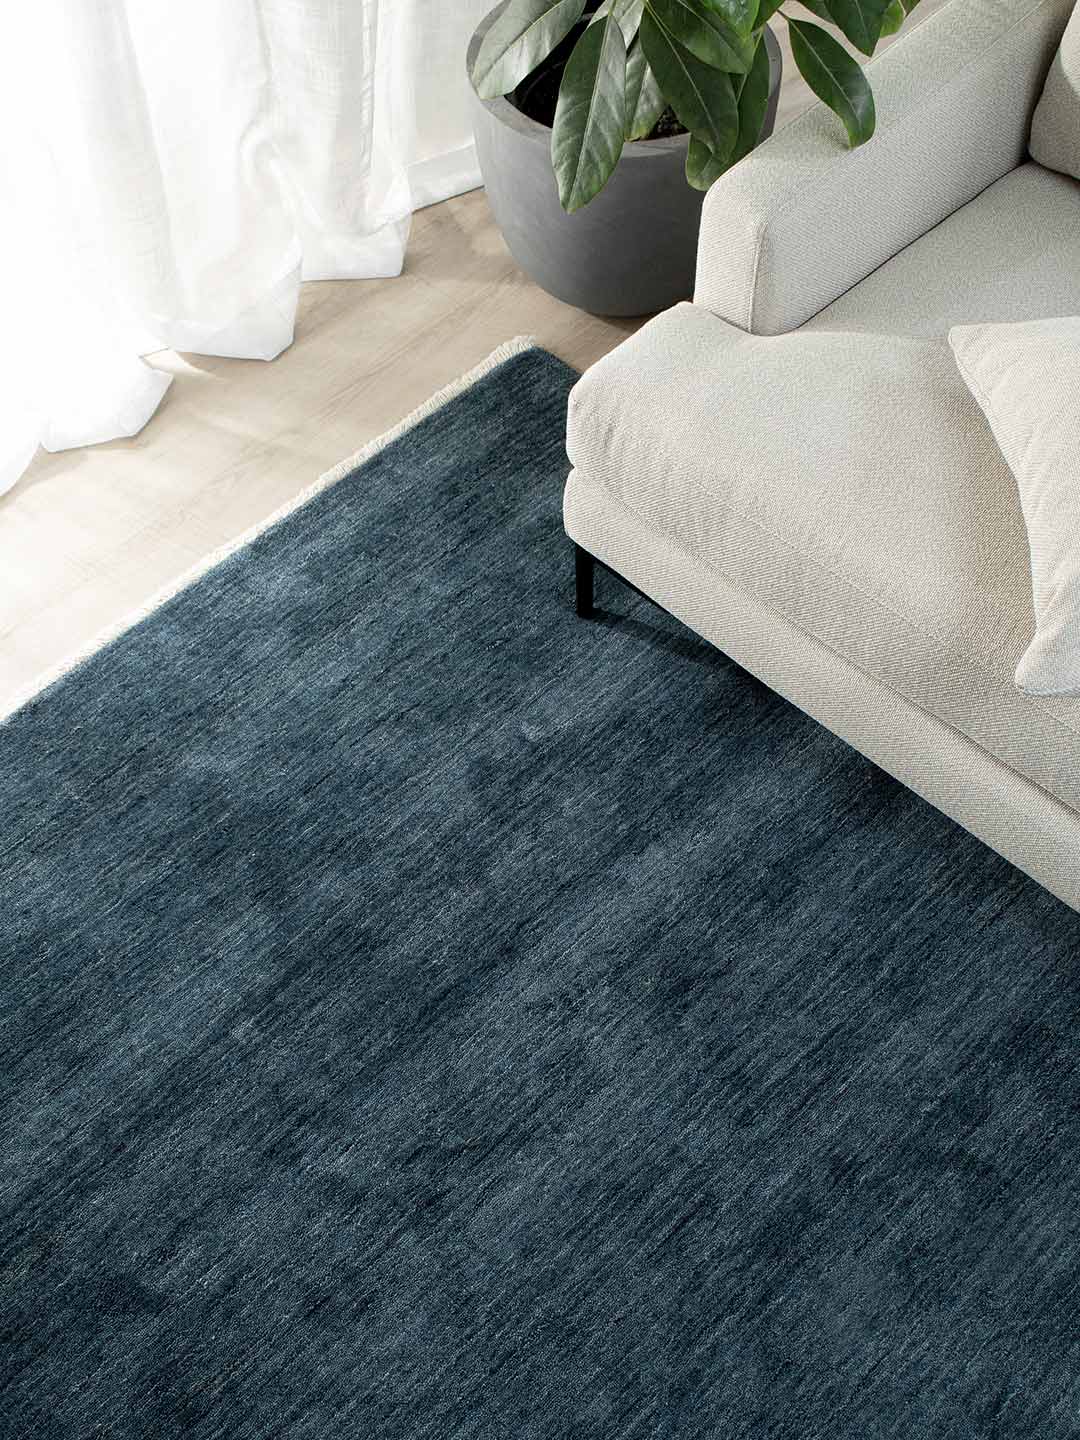 Diva Odyssey Rug 20% off from the Rug Collection Stockist Make Your House A Home, Furniture Store Bendigo. Free Australia Wide Delivery